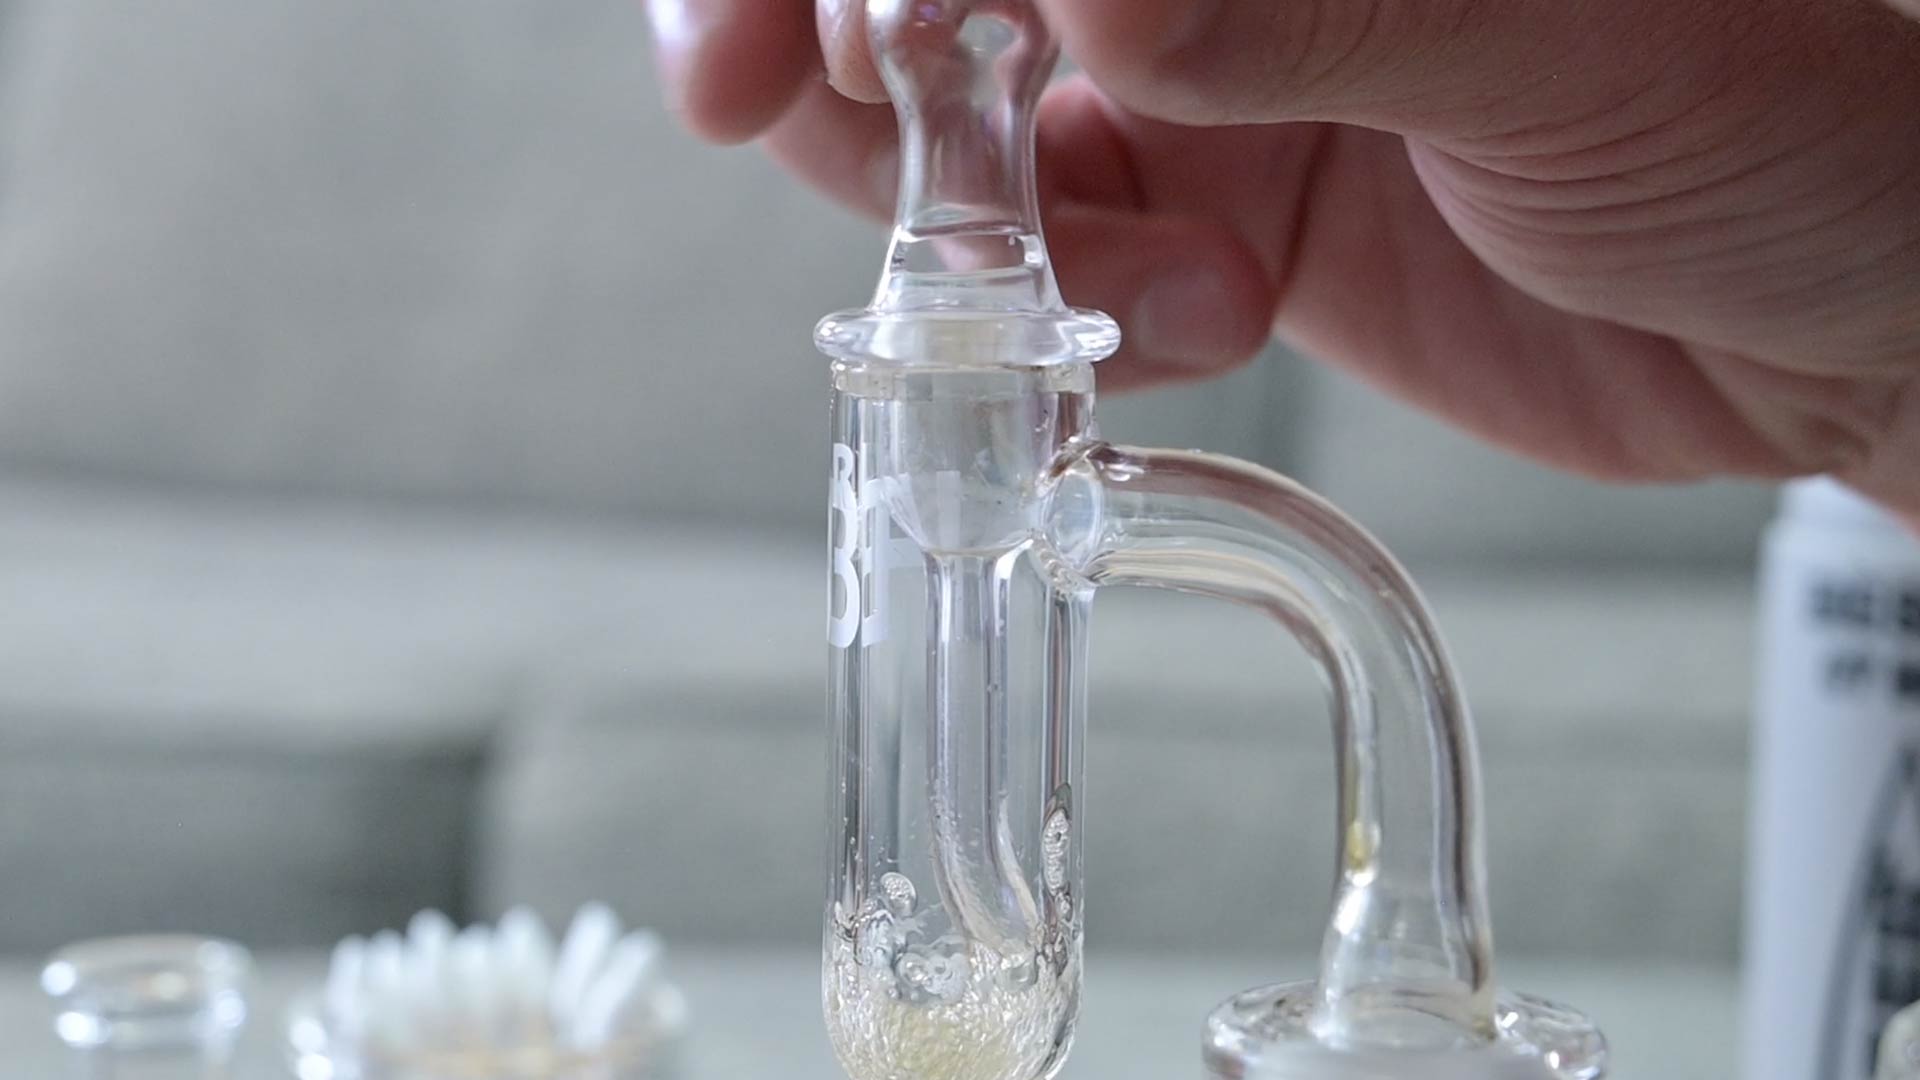 All About Dabs: How Strong Are They?